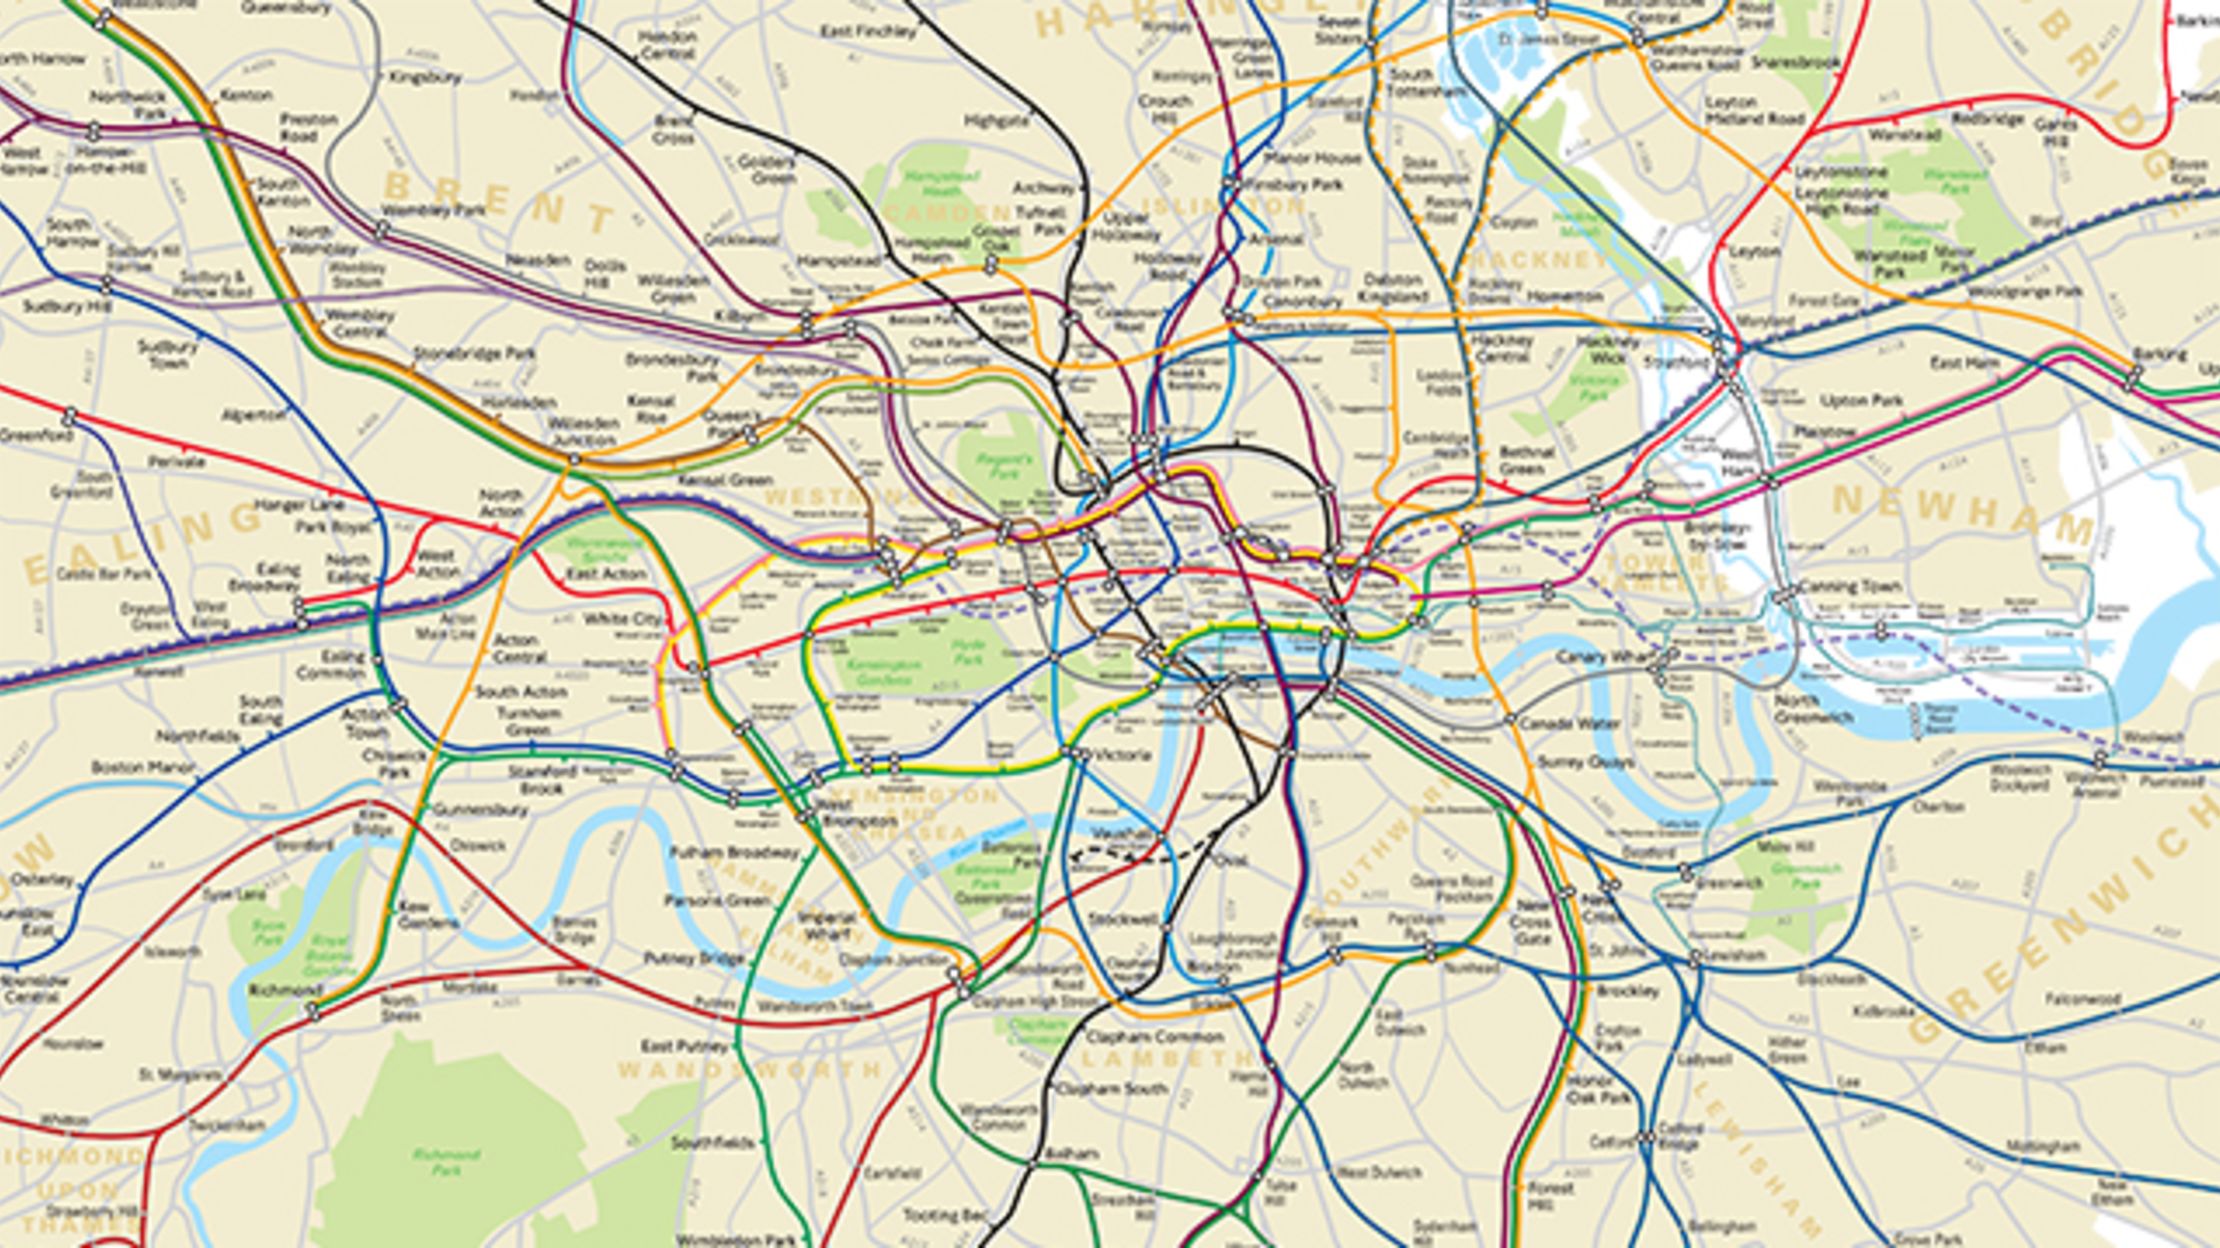 A Geographically Accurate Map of the London Underground | Mental Floss